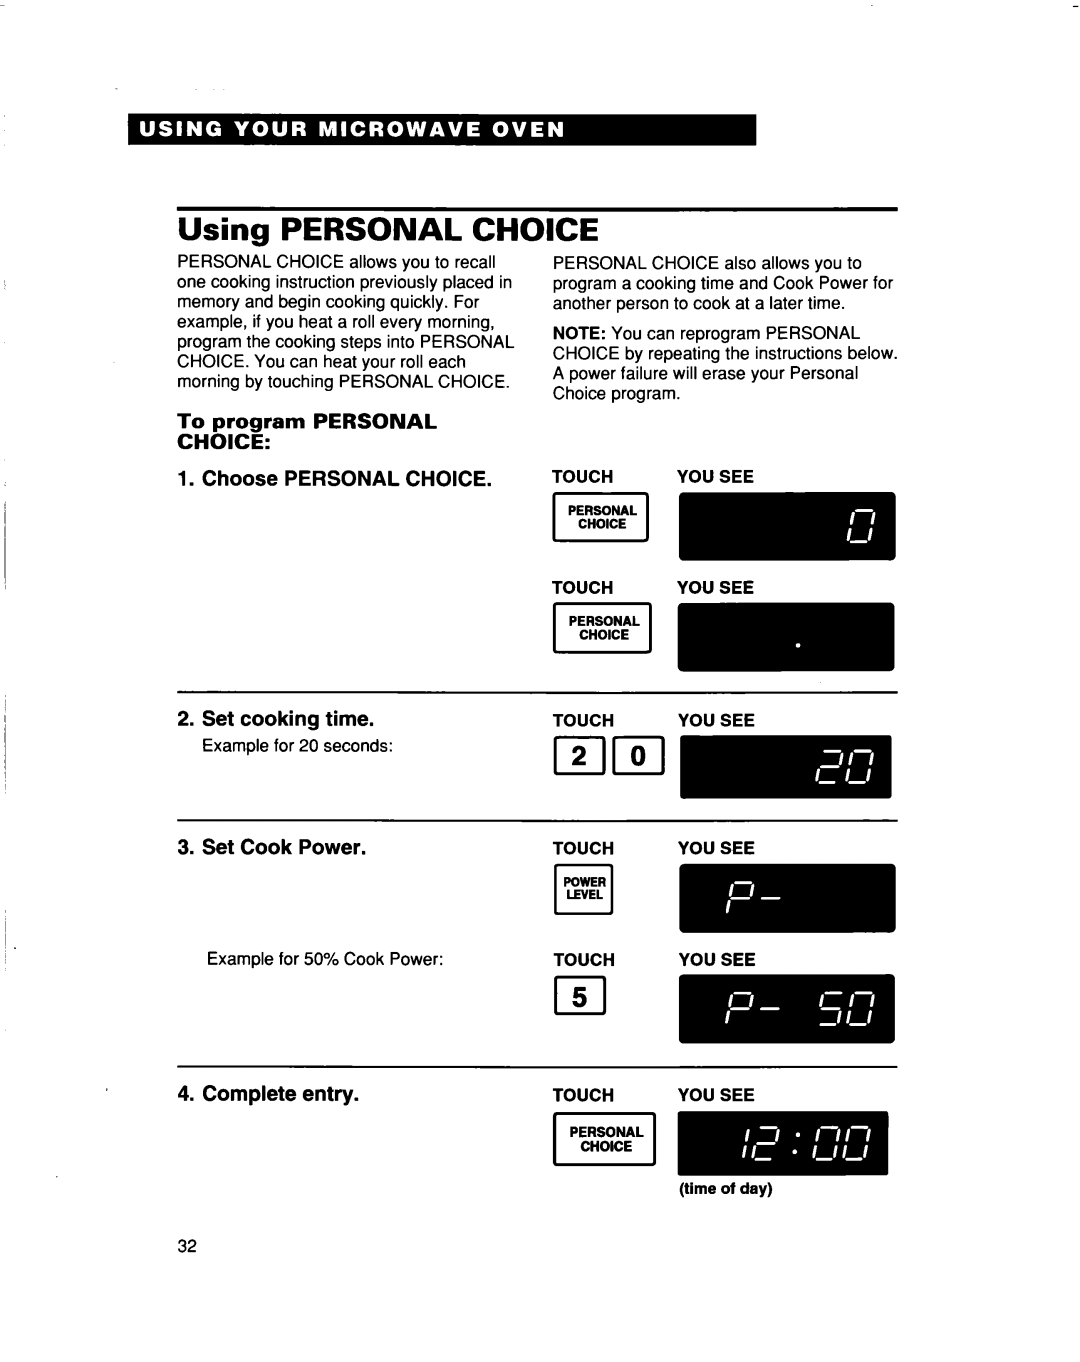 Whirlpool MT5120XAQ Using PERSONAL CHOICE, To program PERSONAL CHOICE, Choose PERSONAL CHOICE 2. Set cooking time 